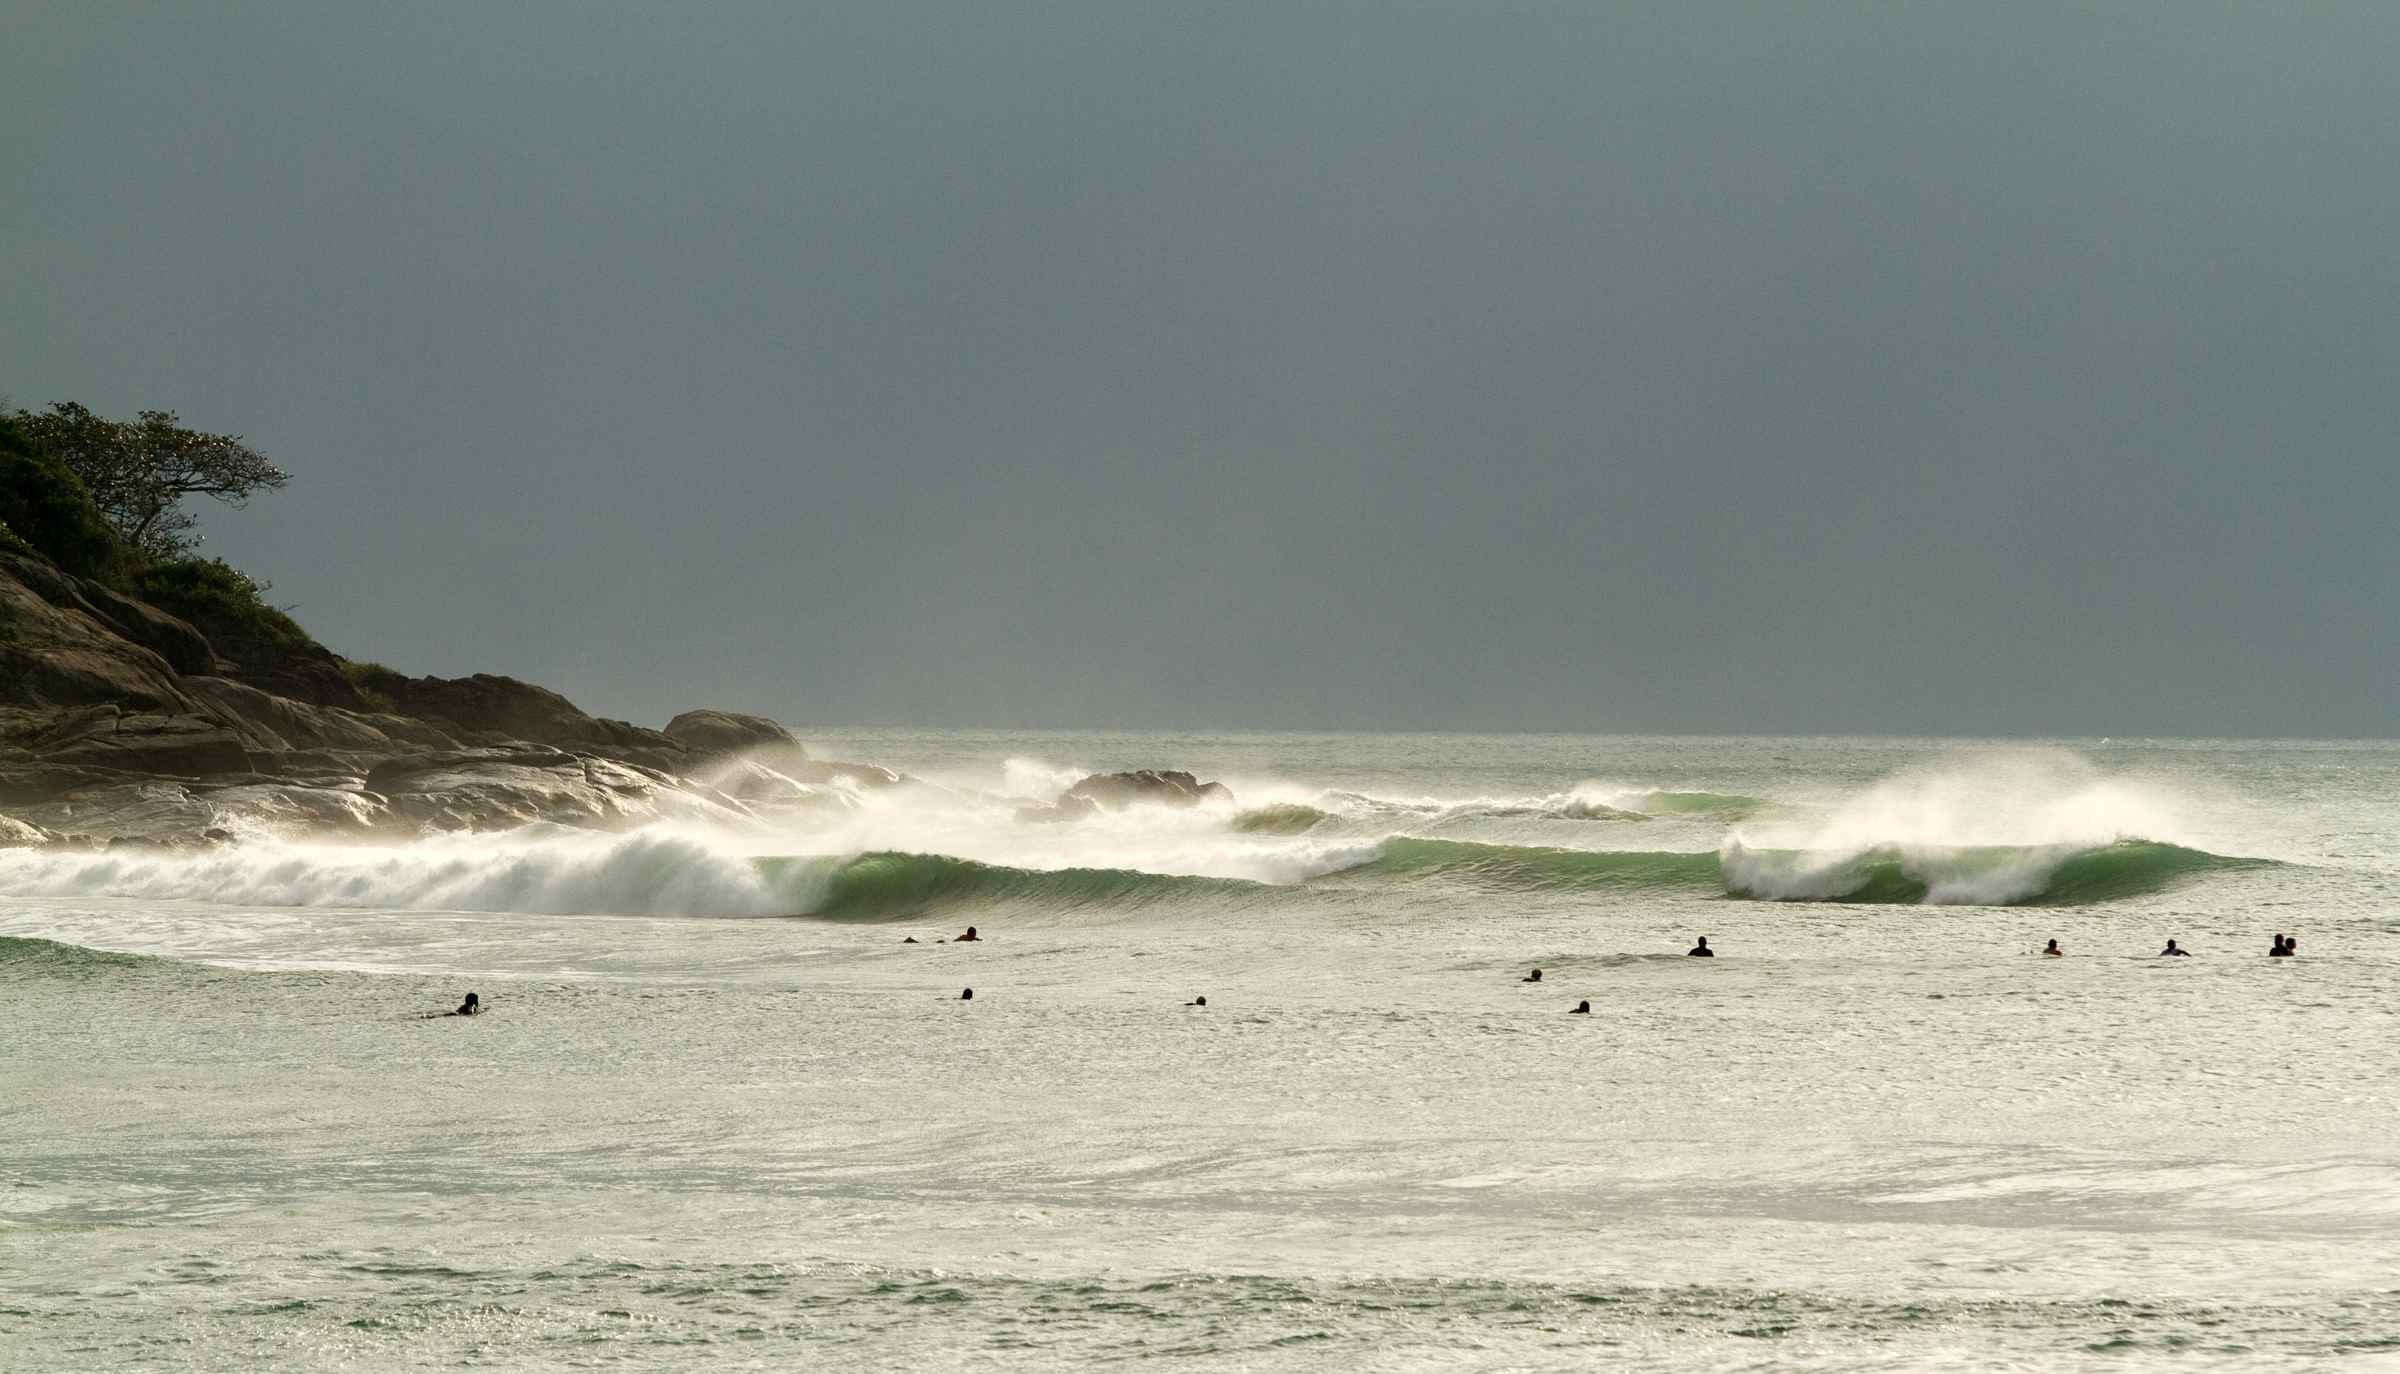 The world class left point break at Riyue Bay await the world’s best surfers to compete in the 2014 Hainan Wanning Riyue Bay International Surfing Festival for the third consecutive year. Photo: ISA/Watts